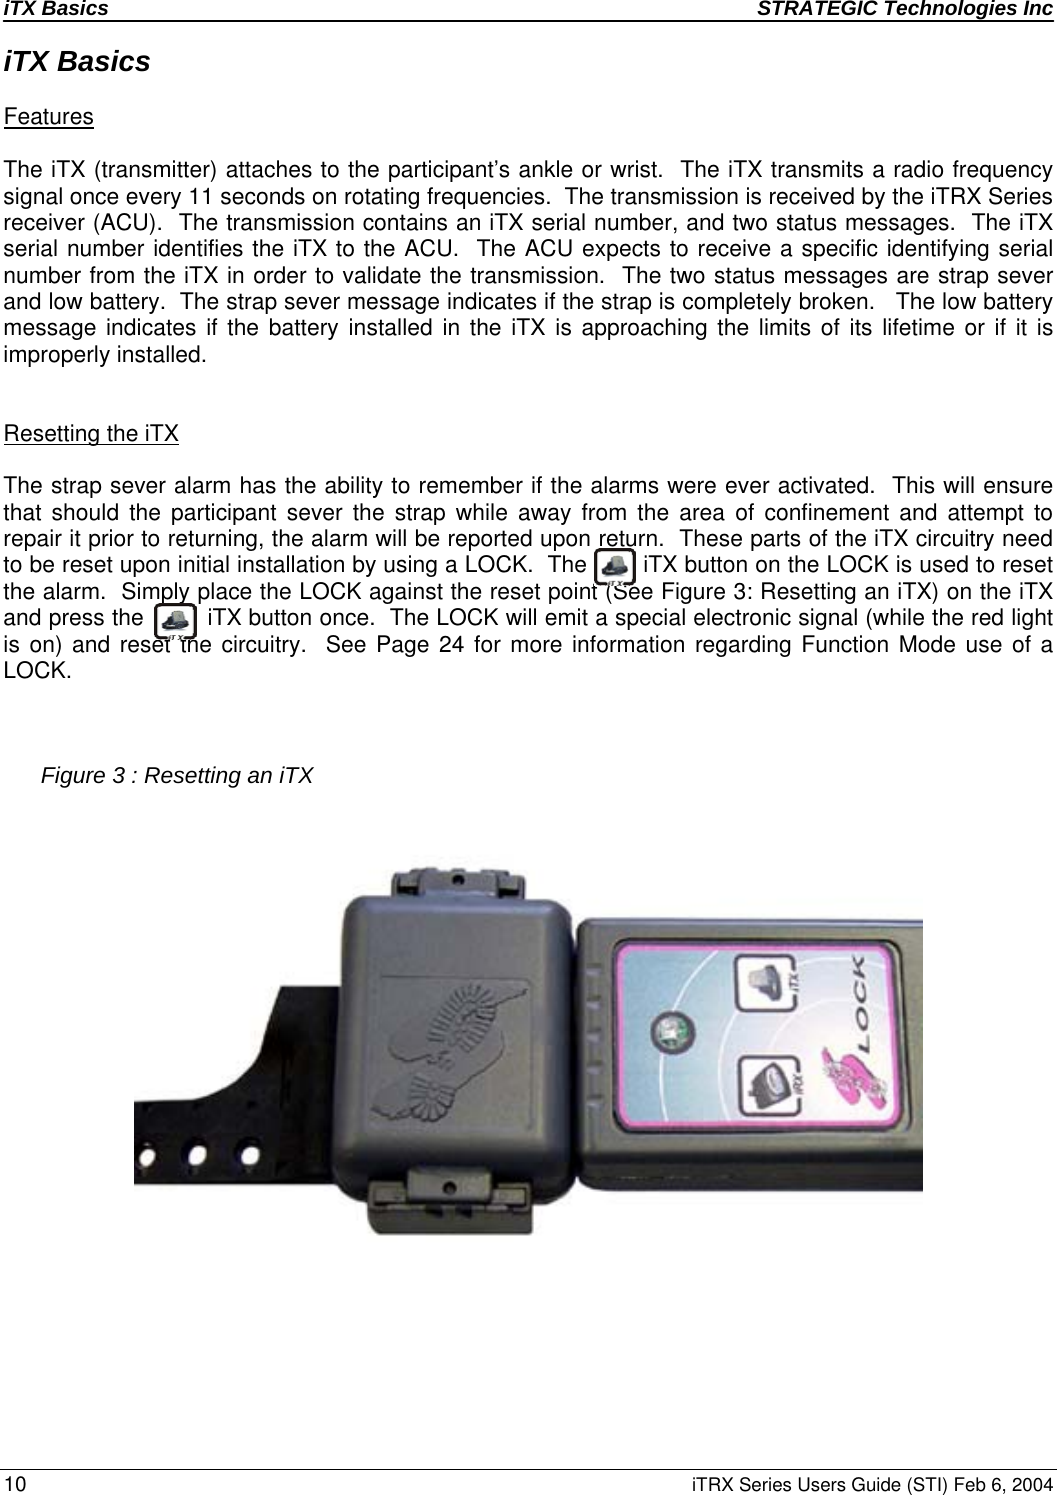 iTX Basics STRATEGIC Technologies Inc  10 iTRX Series Users Guide (STI) Feb 6, 2004 iTX Basics  Features   The iTX (transmitter) attaches to the participant’s ankle or wrist.  The iTX transmits a radio frequency signal once every 11 seconds on rotating frequencies.  The transmission is received by the iTRX Series receiver (ACU).  The transmission contains an iTX serial number, and two status messages.  The iTX serial number identifies the iTX to the ACU.  The ACU expects to receive a specific identifying serial number from the iTX in order to validate the transmission.  The two status messages are strap sever and low battery.  The strap sever message indicates if the strap is completely broken.   The low battery message indicates if the battery installed in the iTX is approaching the limits of its lifetime or if it is improperly installed.   Resetting the iTX    The strap sever alarm has the ability to remember if the alarms were ever activated.  This will ensure that should the participant sever the strap while away from the area of confinement and attempt to repair it prior to returning, the alarm will be reported upon return.  These parts of the iTX circuitry need to be reset upon initial installation by using a LOCK.  The        iTX button on the LOCK is used to reset the alarm.  Simply place the LOCK against the reset point (See Figure 3: Resetting an iTX) on the iTX and press the         iTX button once.  The LOCK will emit a special electronic signal (while the red light is on) and reset the circuitry.  See Page 24 for more information regarding Function Mode use of a LOCK.      Figure 3 : Resetting an iTX           